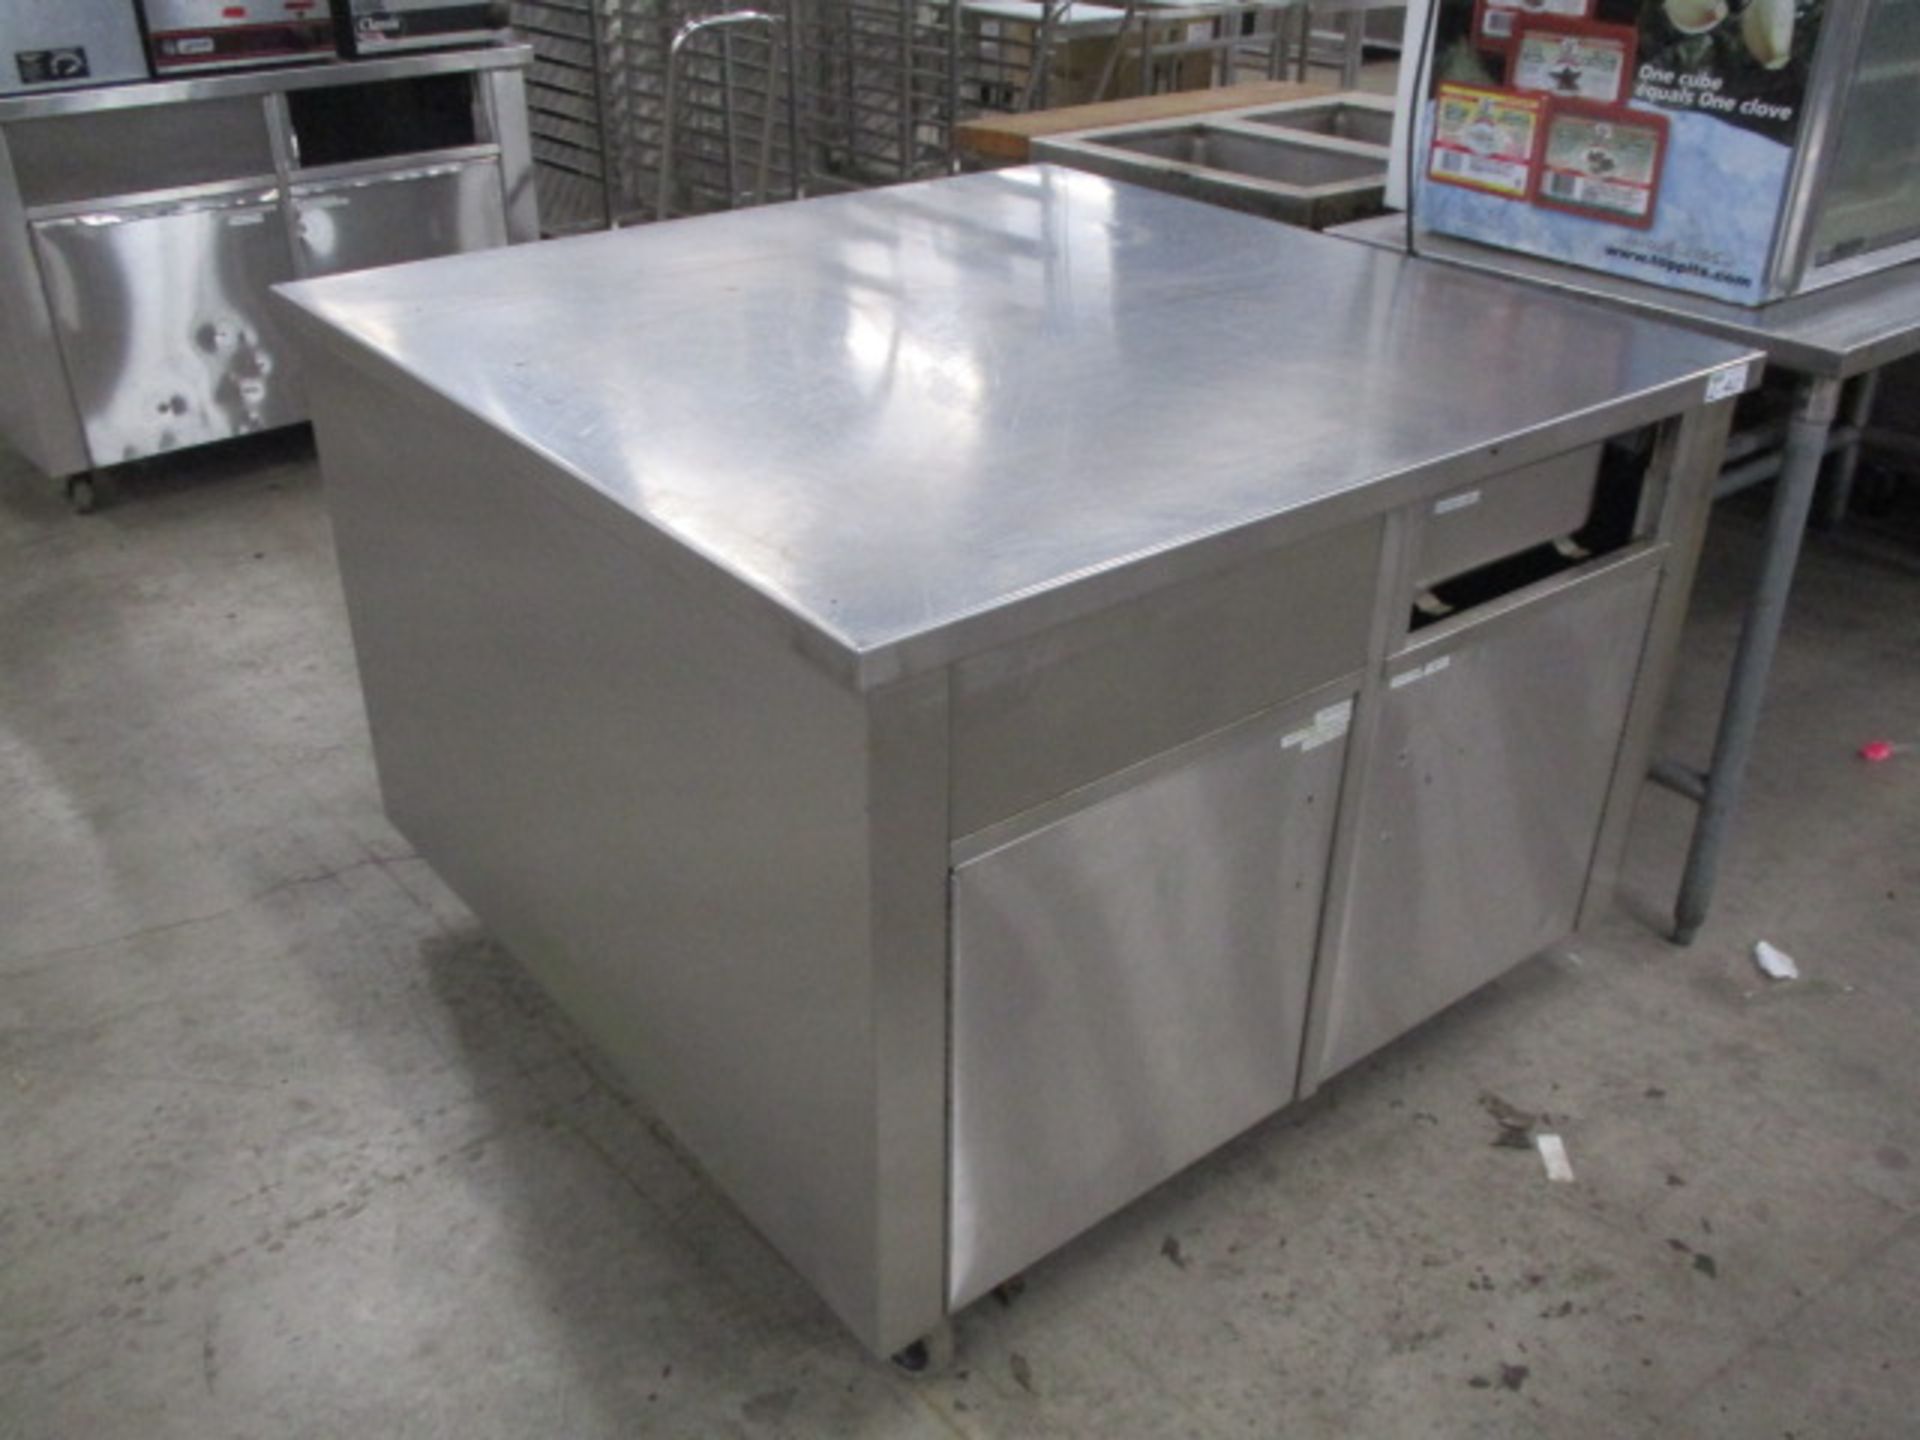 S/S 48" X 48" Mobile Work Counter (missing One (1) wheel)